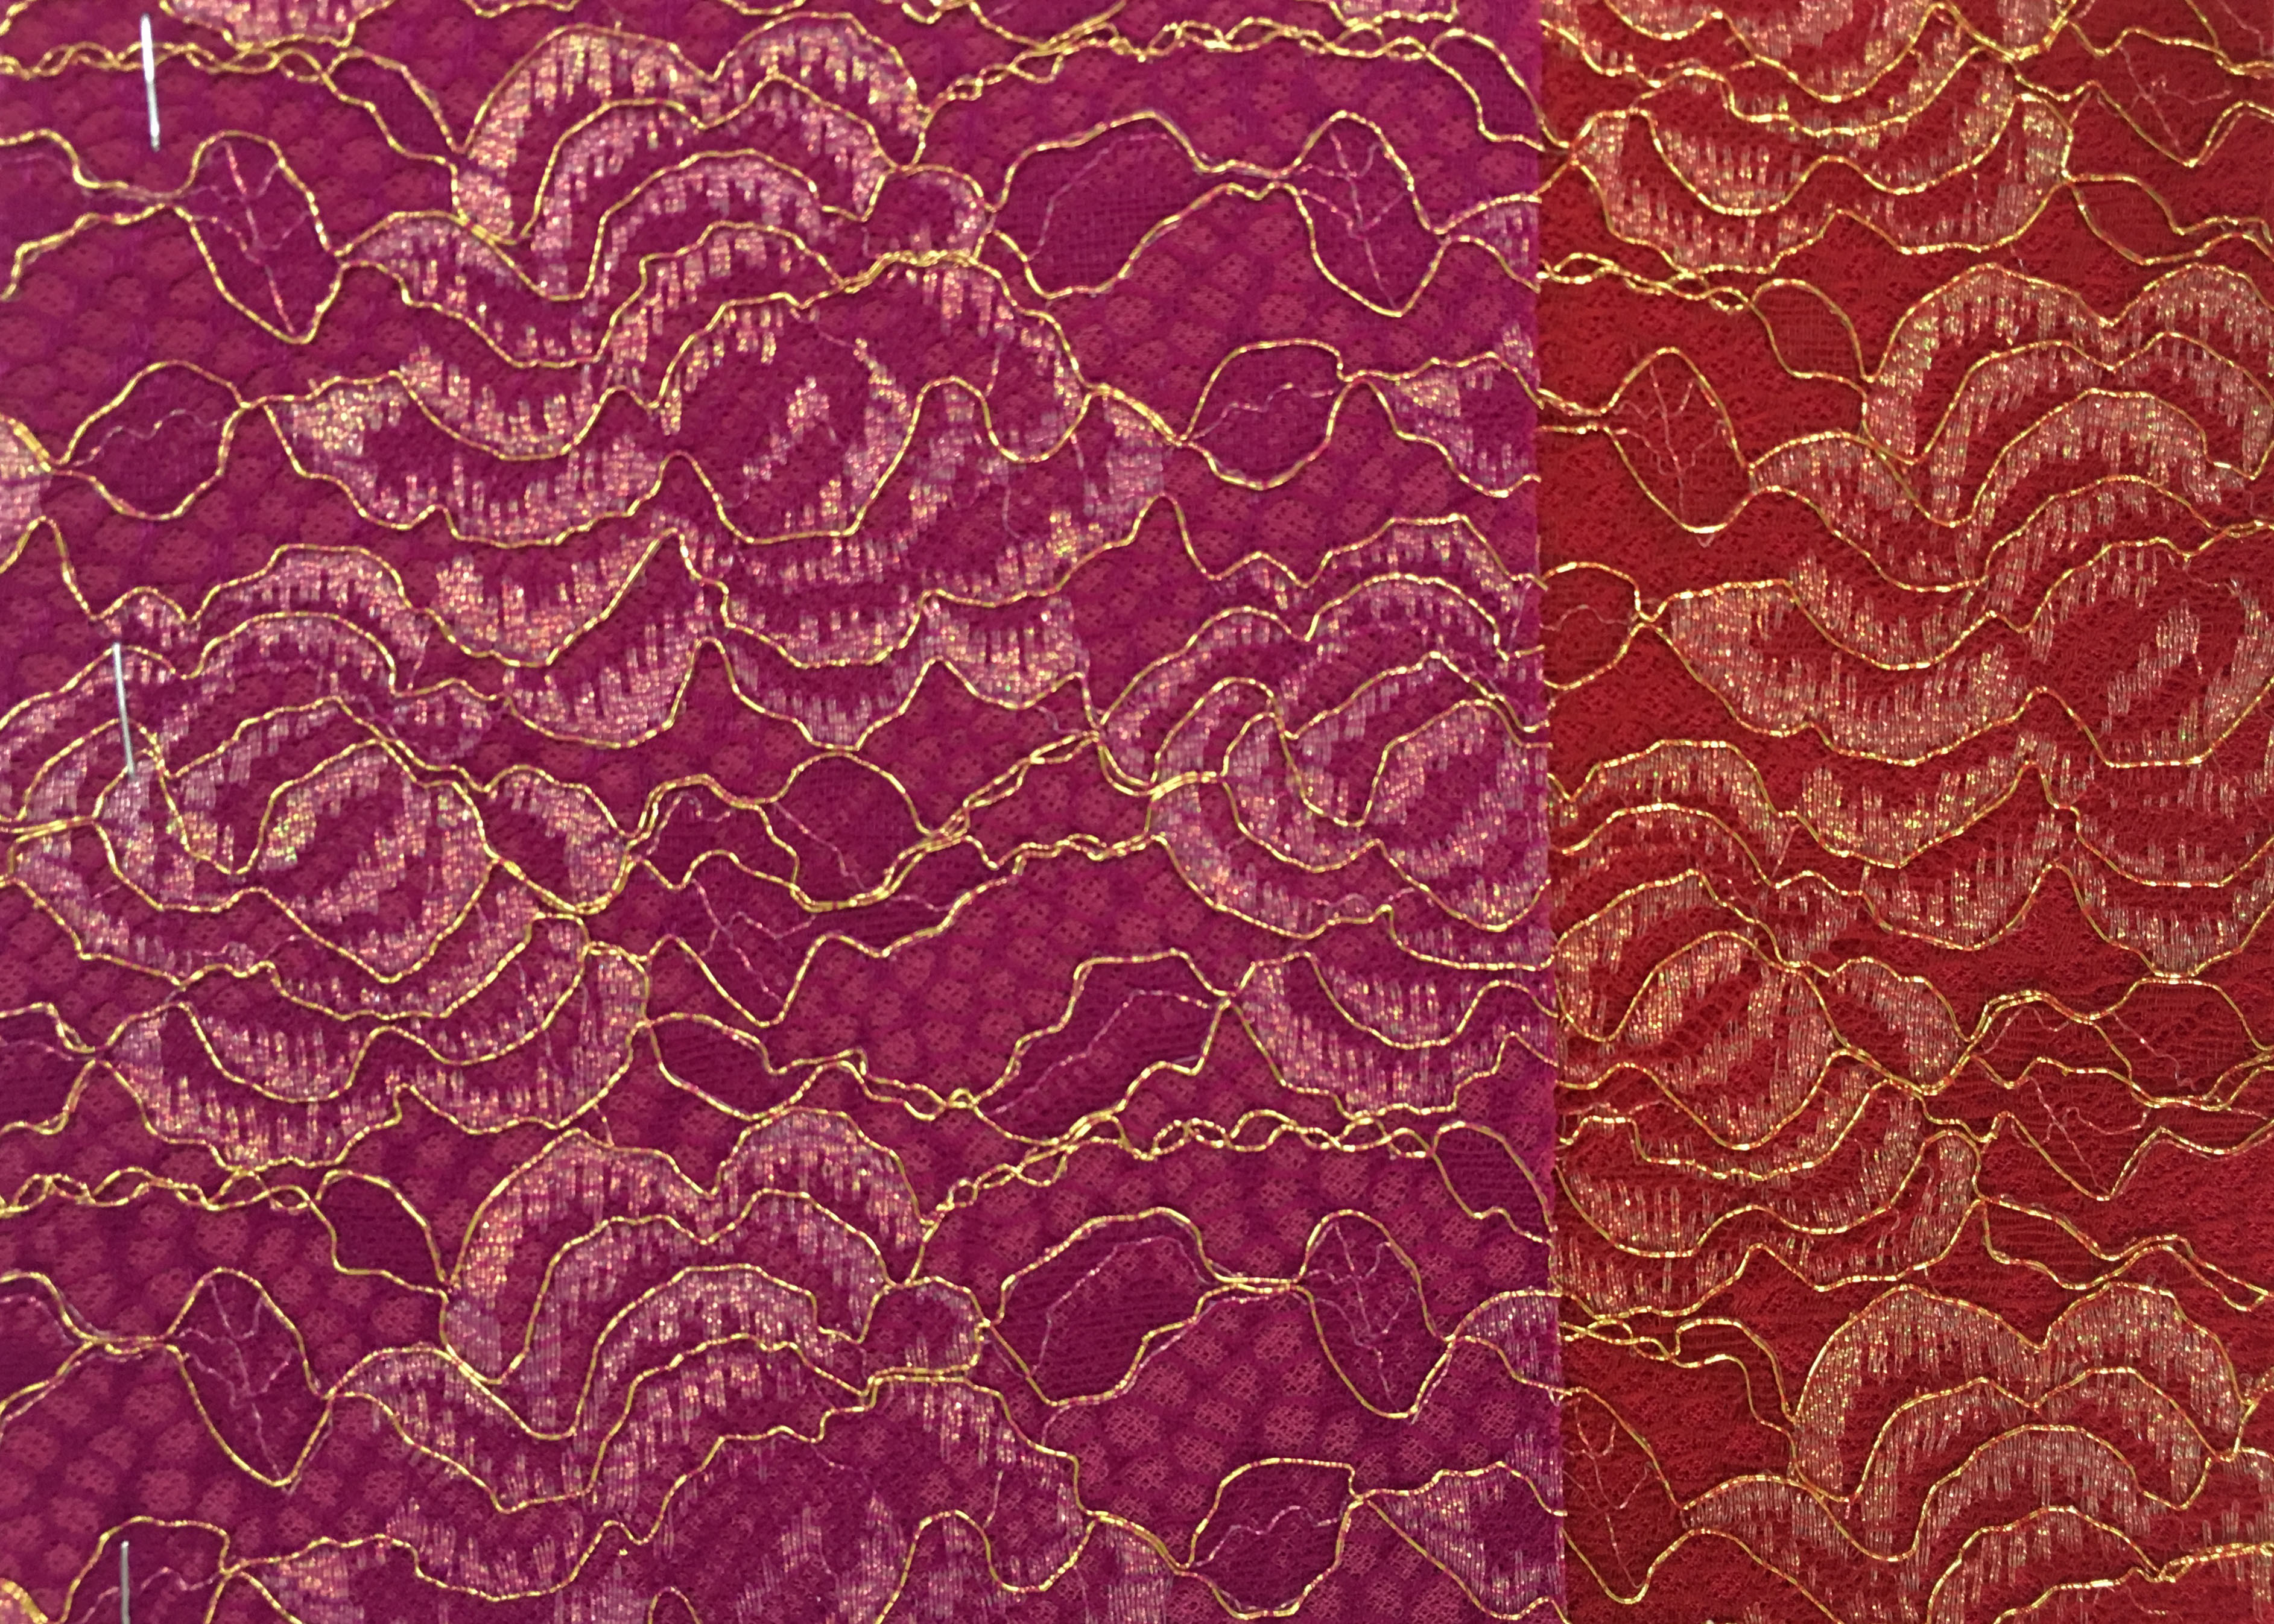  Red Golden Embroidery Sequin Lingerie Lace Fabric For Wedding Dress , Decoration Lace Fabric Manufactures